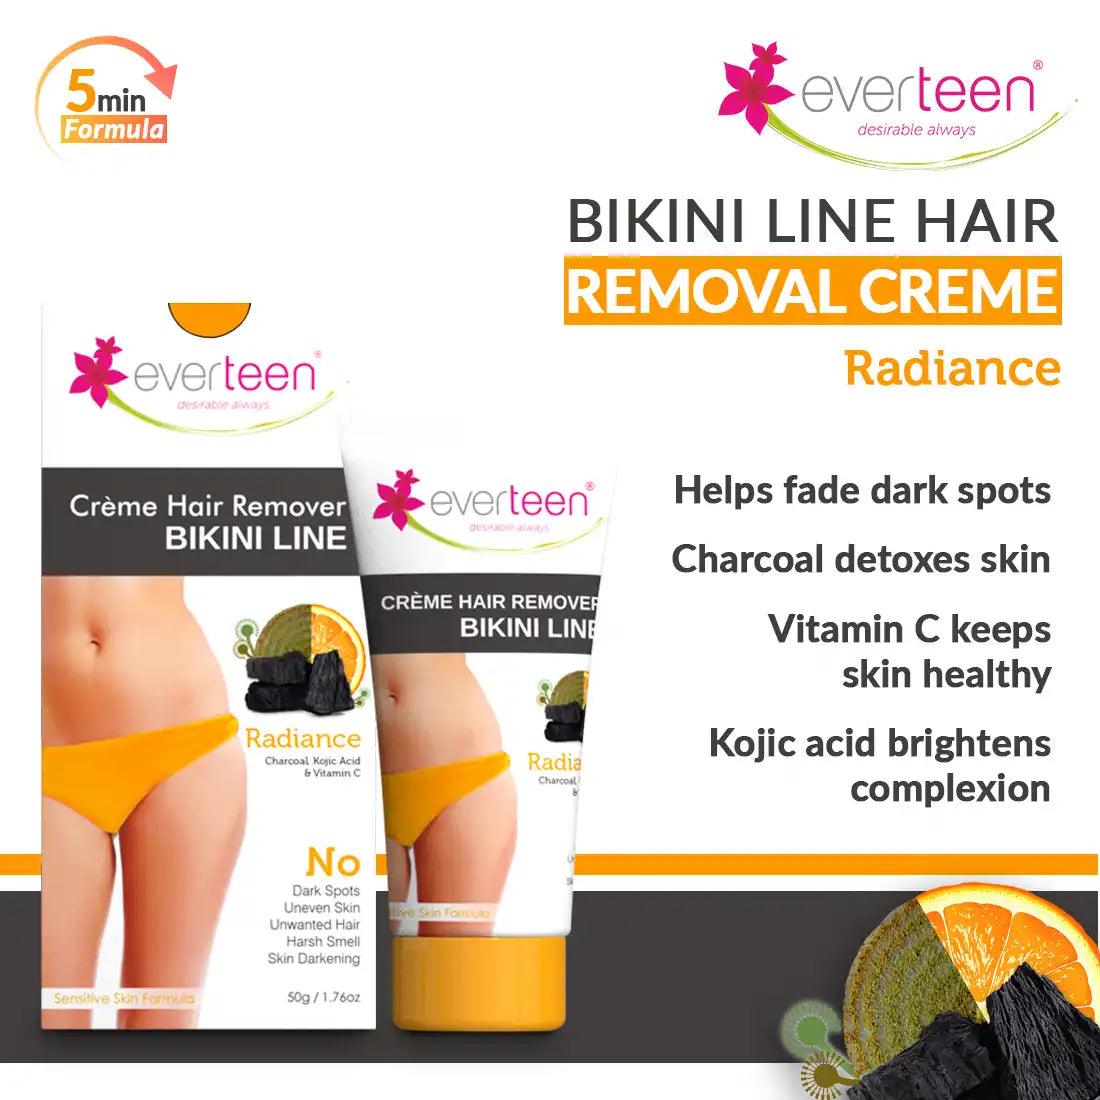 everteen Radiance Hair Remover Creme for Bikini Line and Underarms Helps Fade Dark Spots And Brighten Complexion - everteen-neud.com